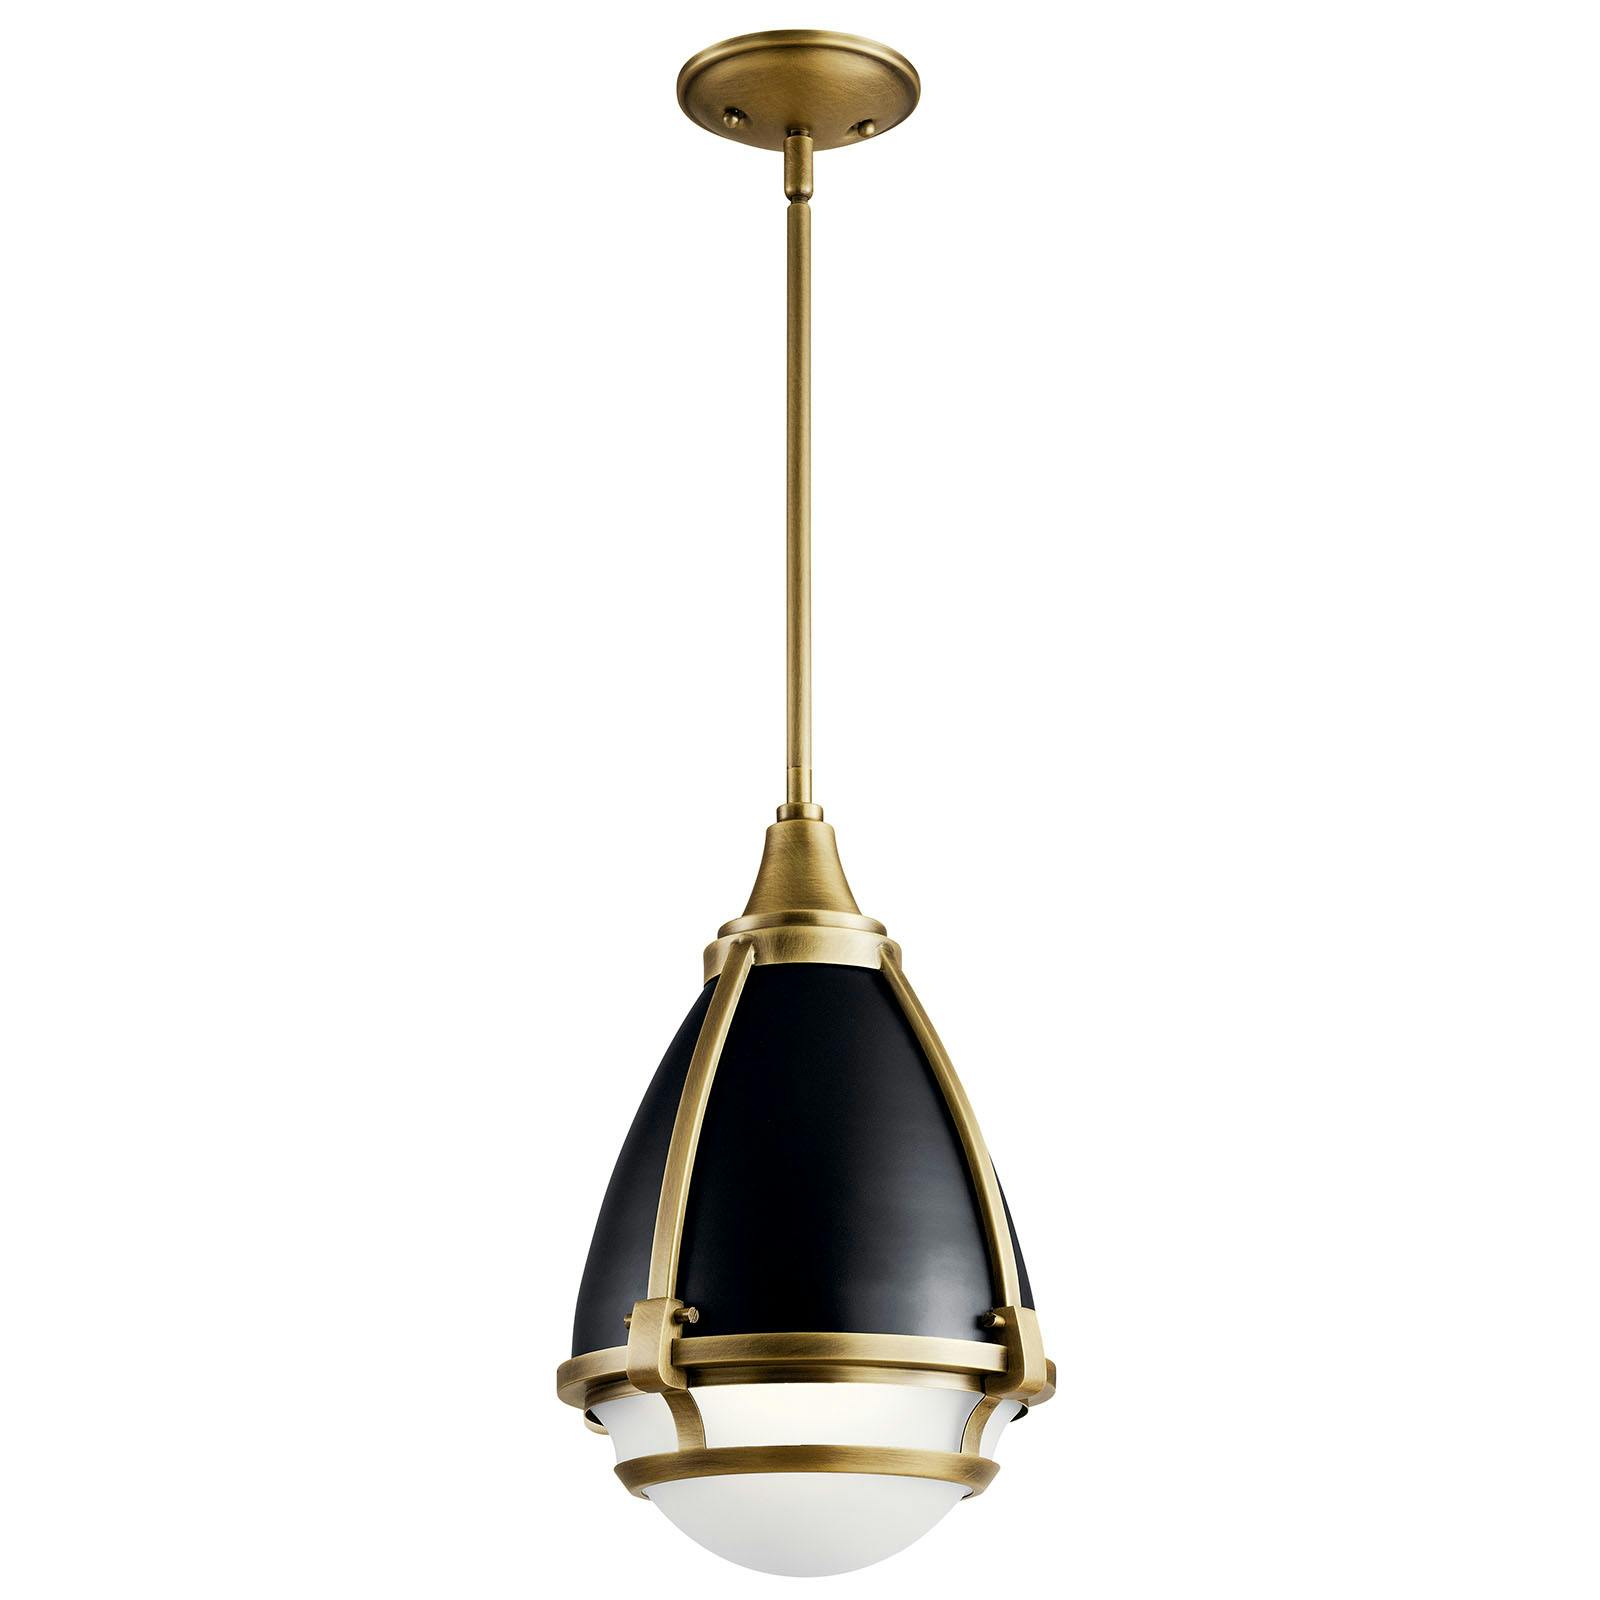 Ayra 1 Light Pendant Natural Brass on a white background